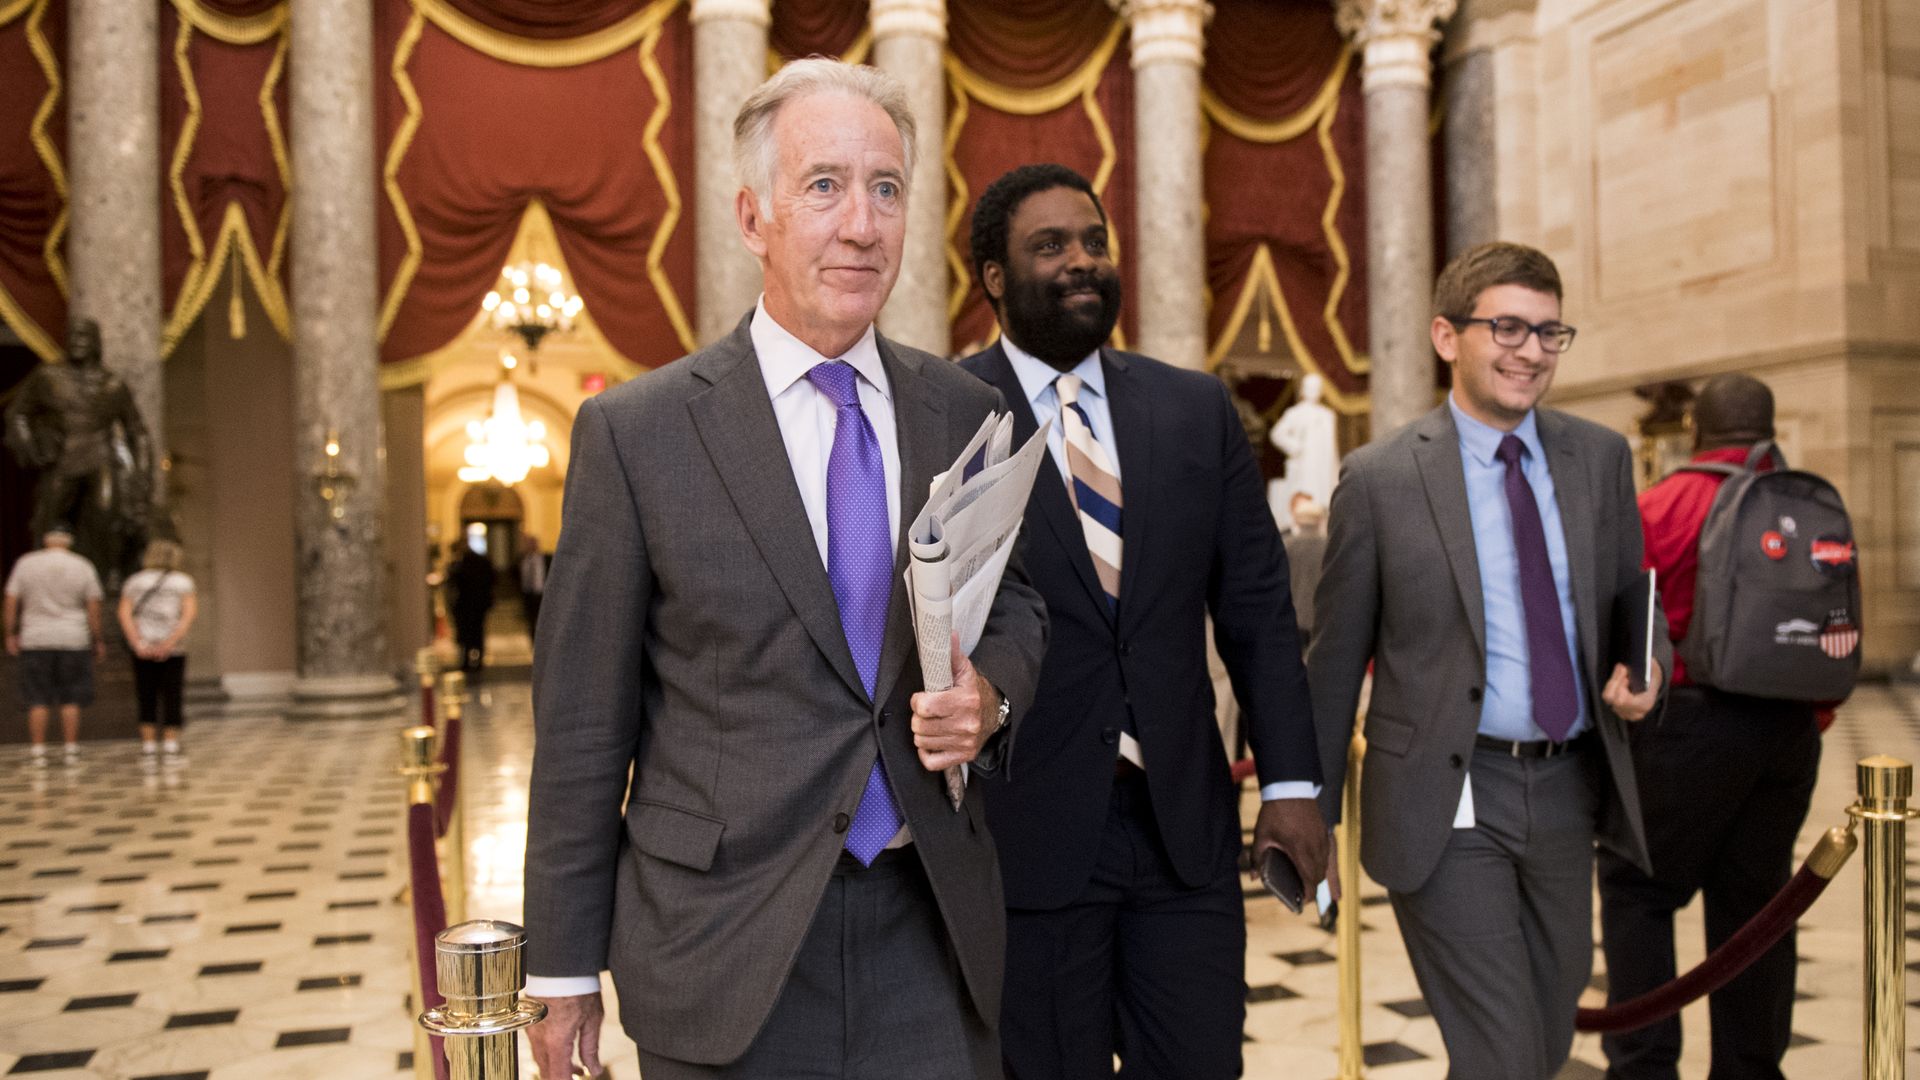 Ways and Means Committee Chairman Rep. Richard Neal (D-Mass.)